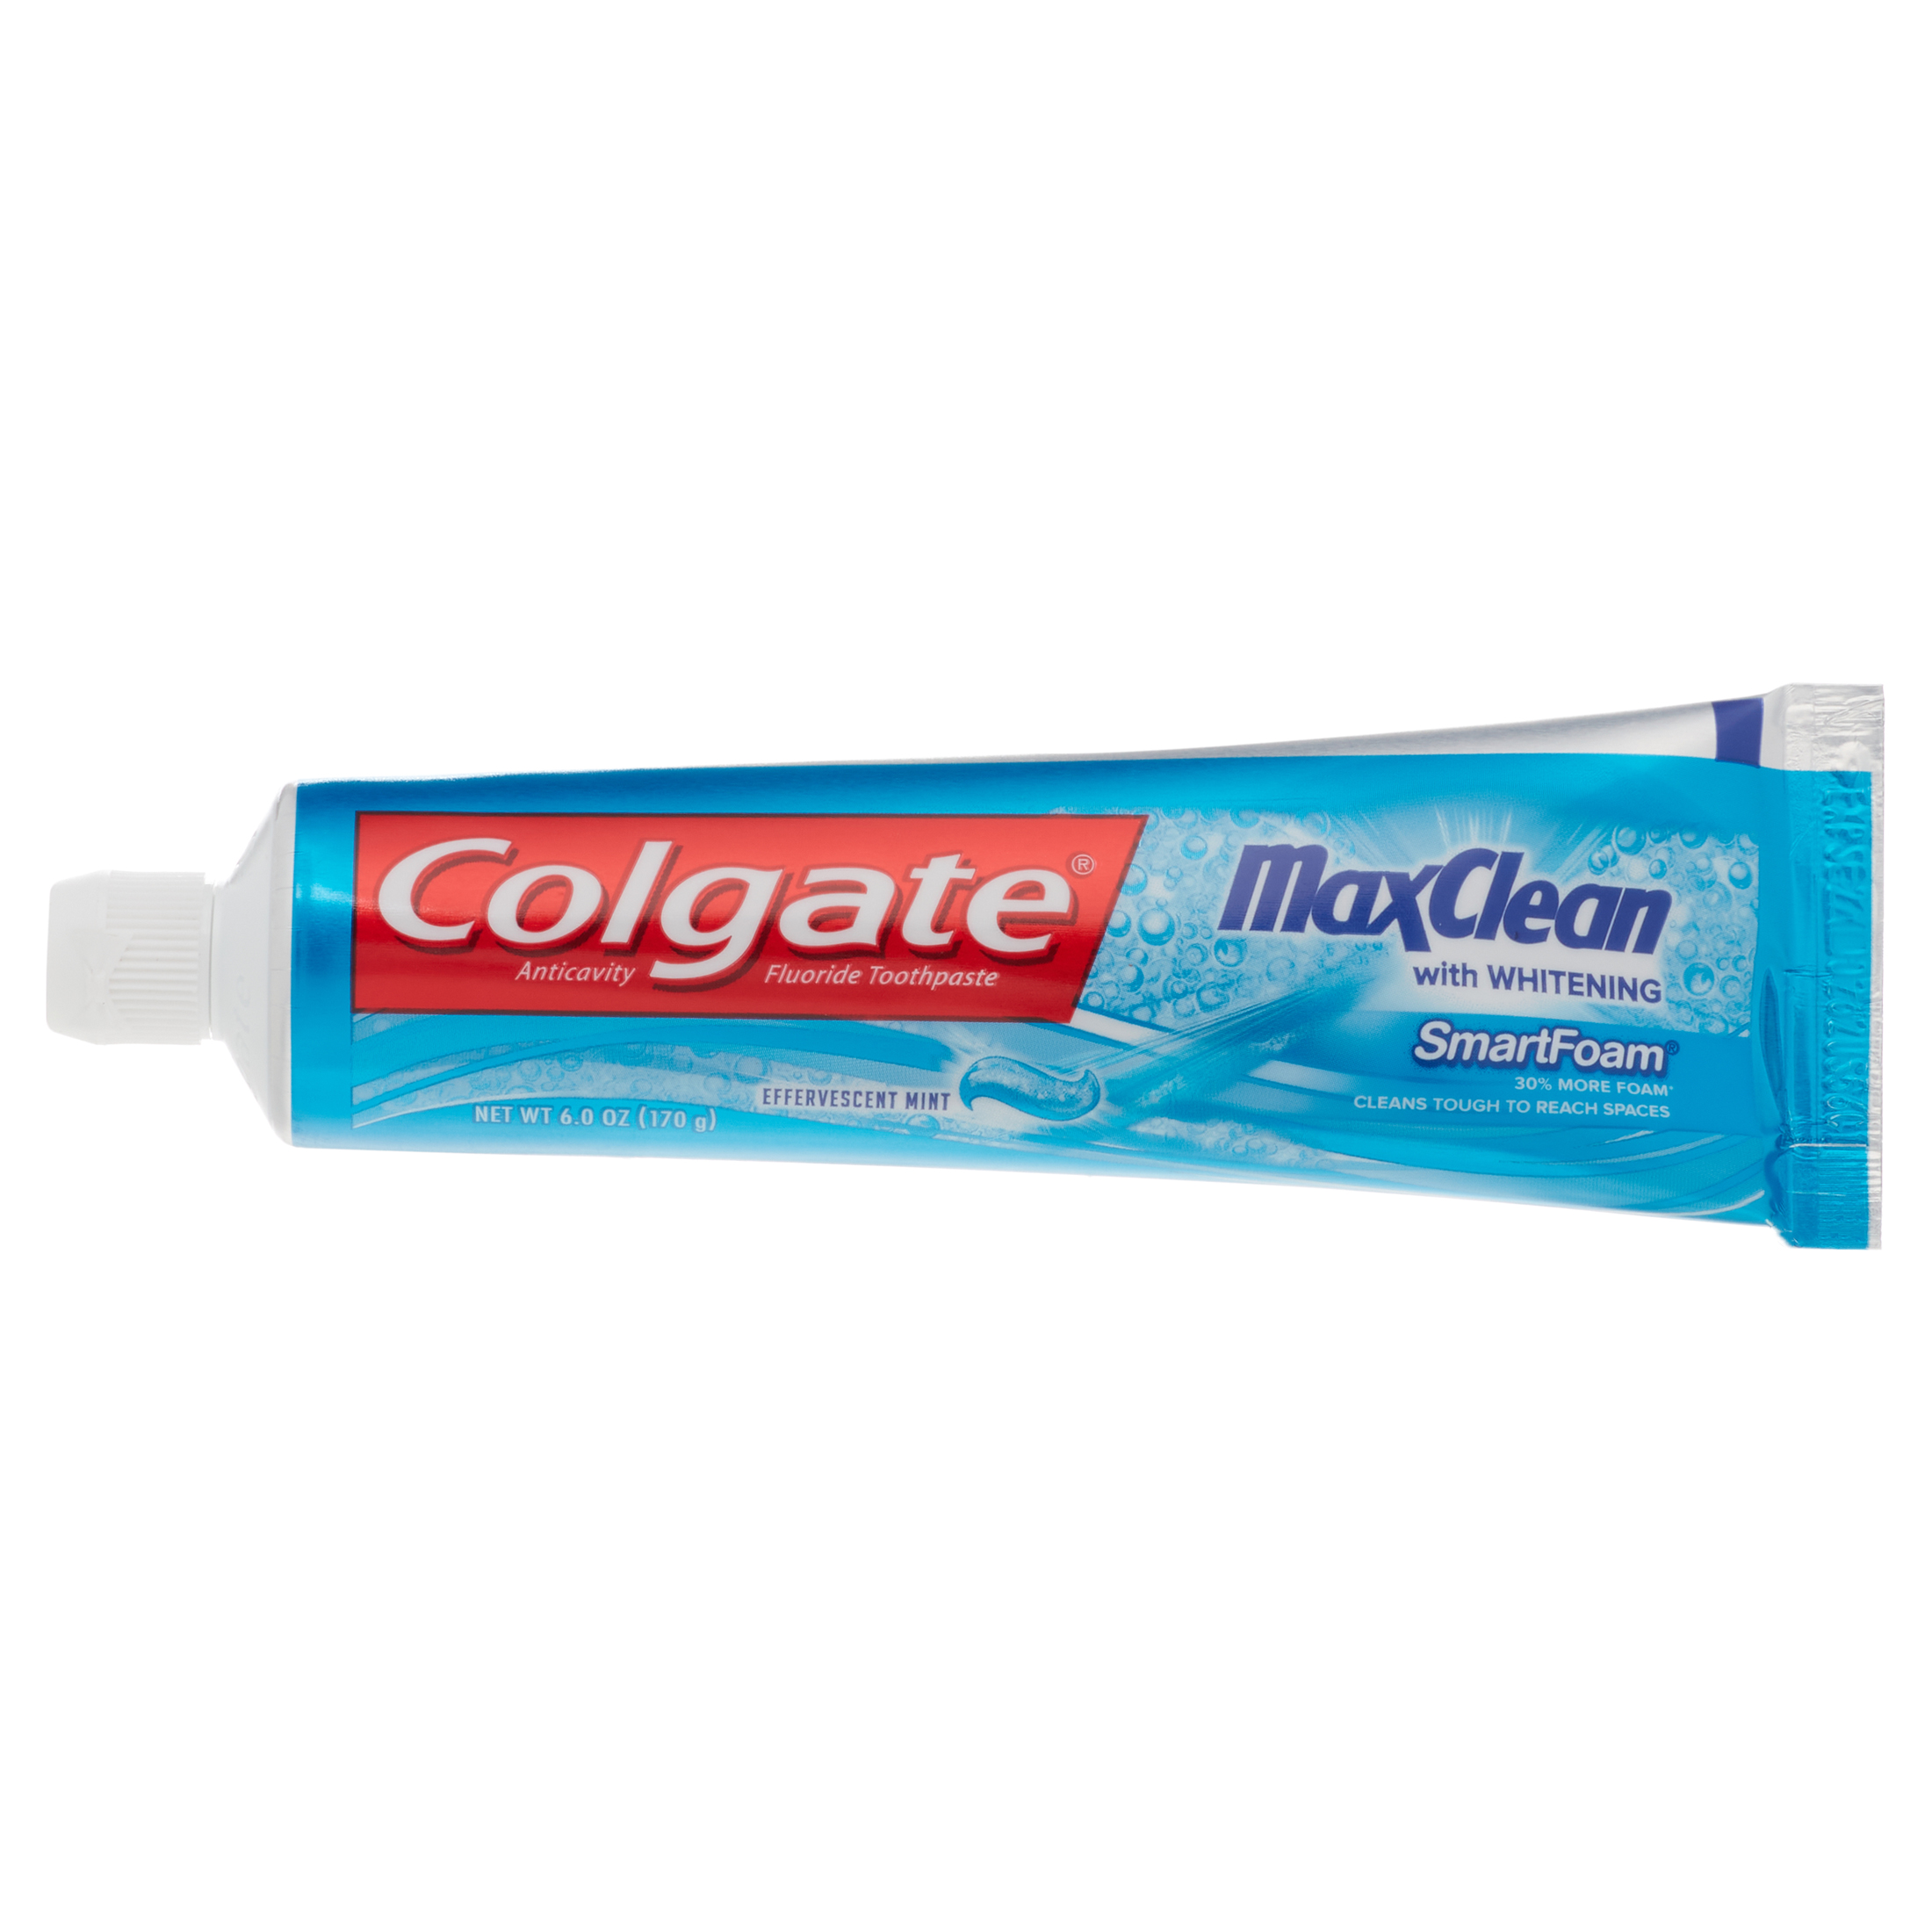 Colgate MaxClean SmartFoam Toothpaste Effervescent Mint - 6.0 Ounce (3 Pack) - image 2 of 12